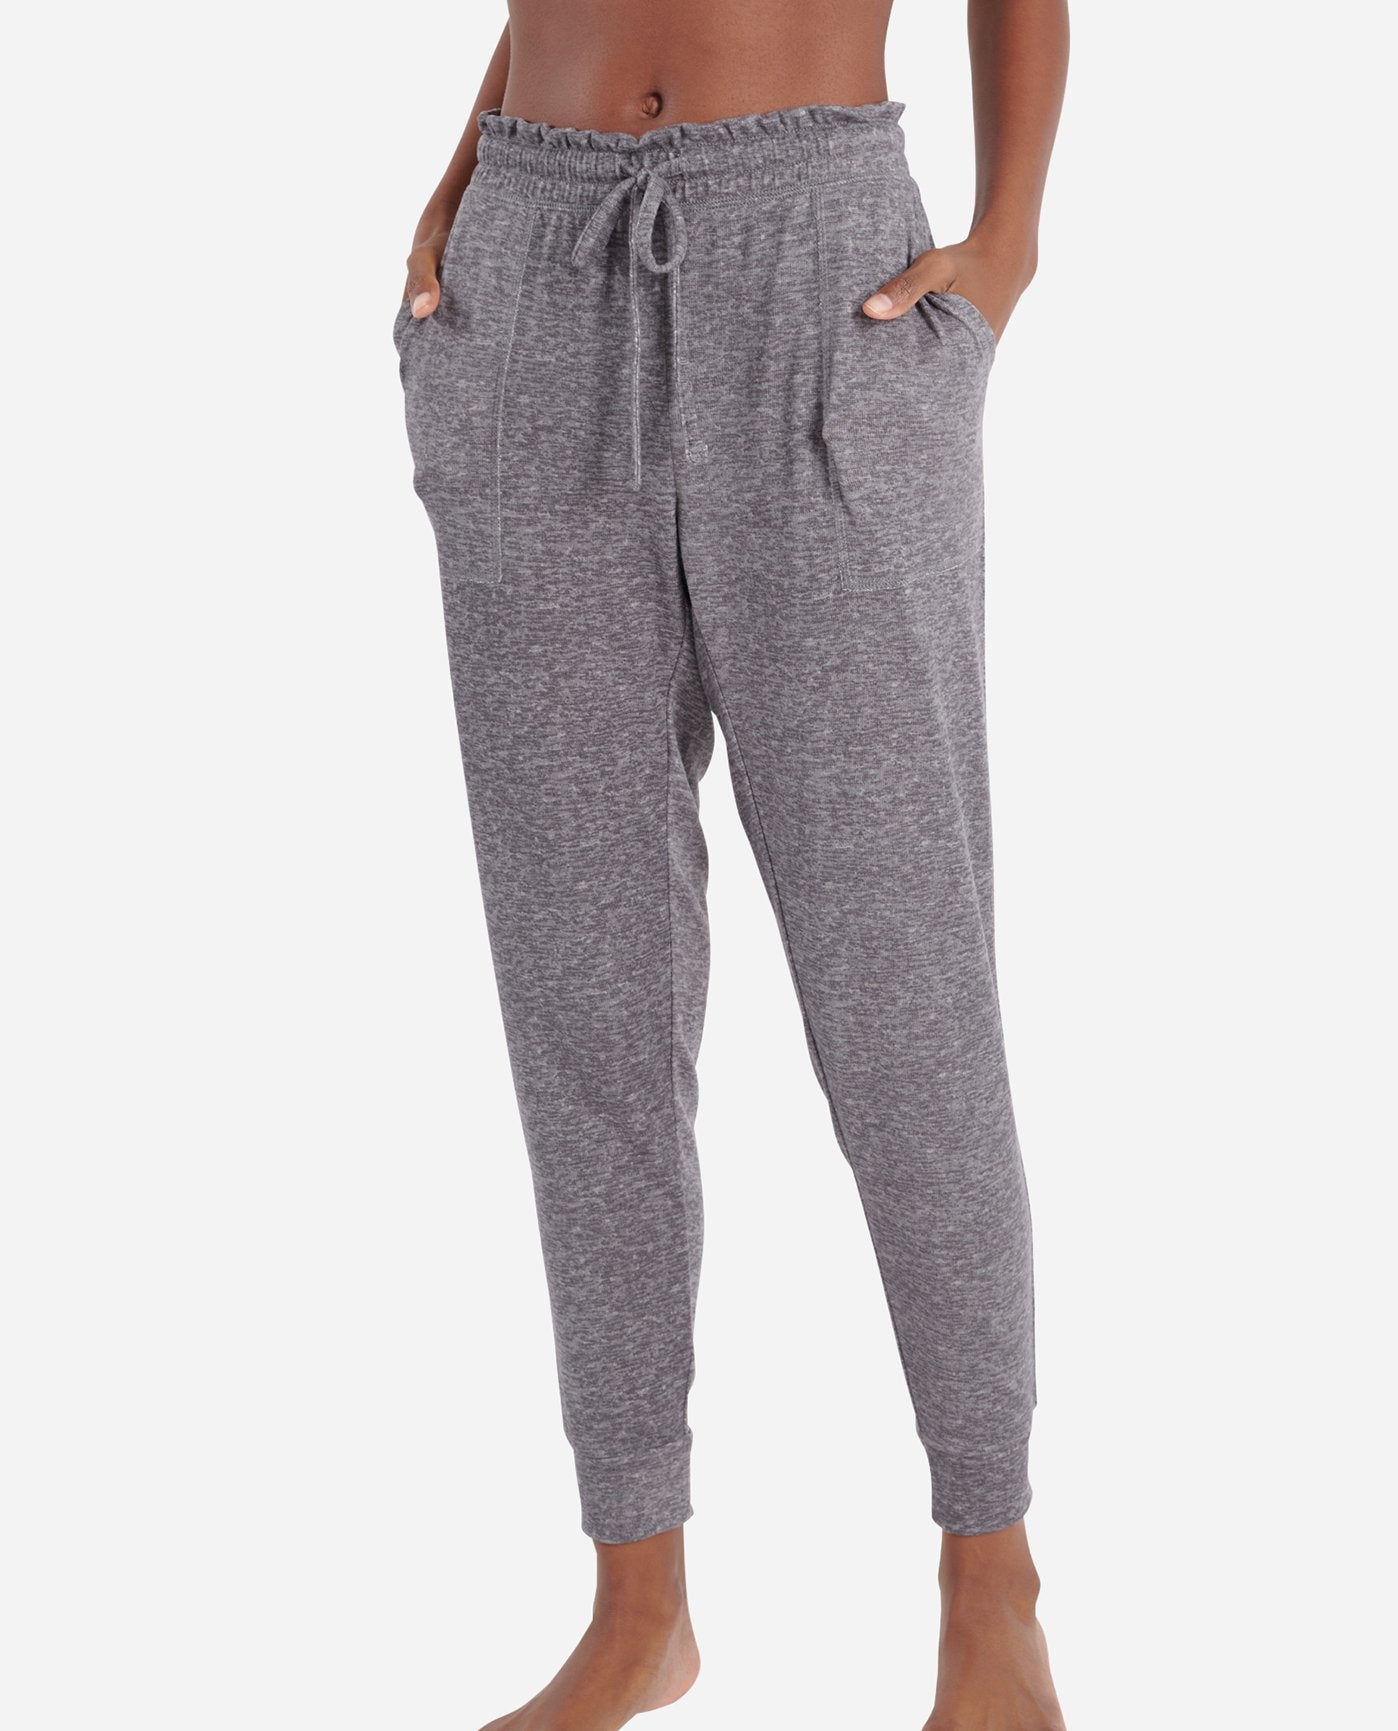 Printed Flannel Jogger Pajama Pants for Women  Old Navy